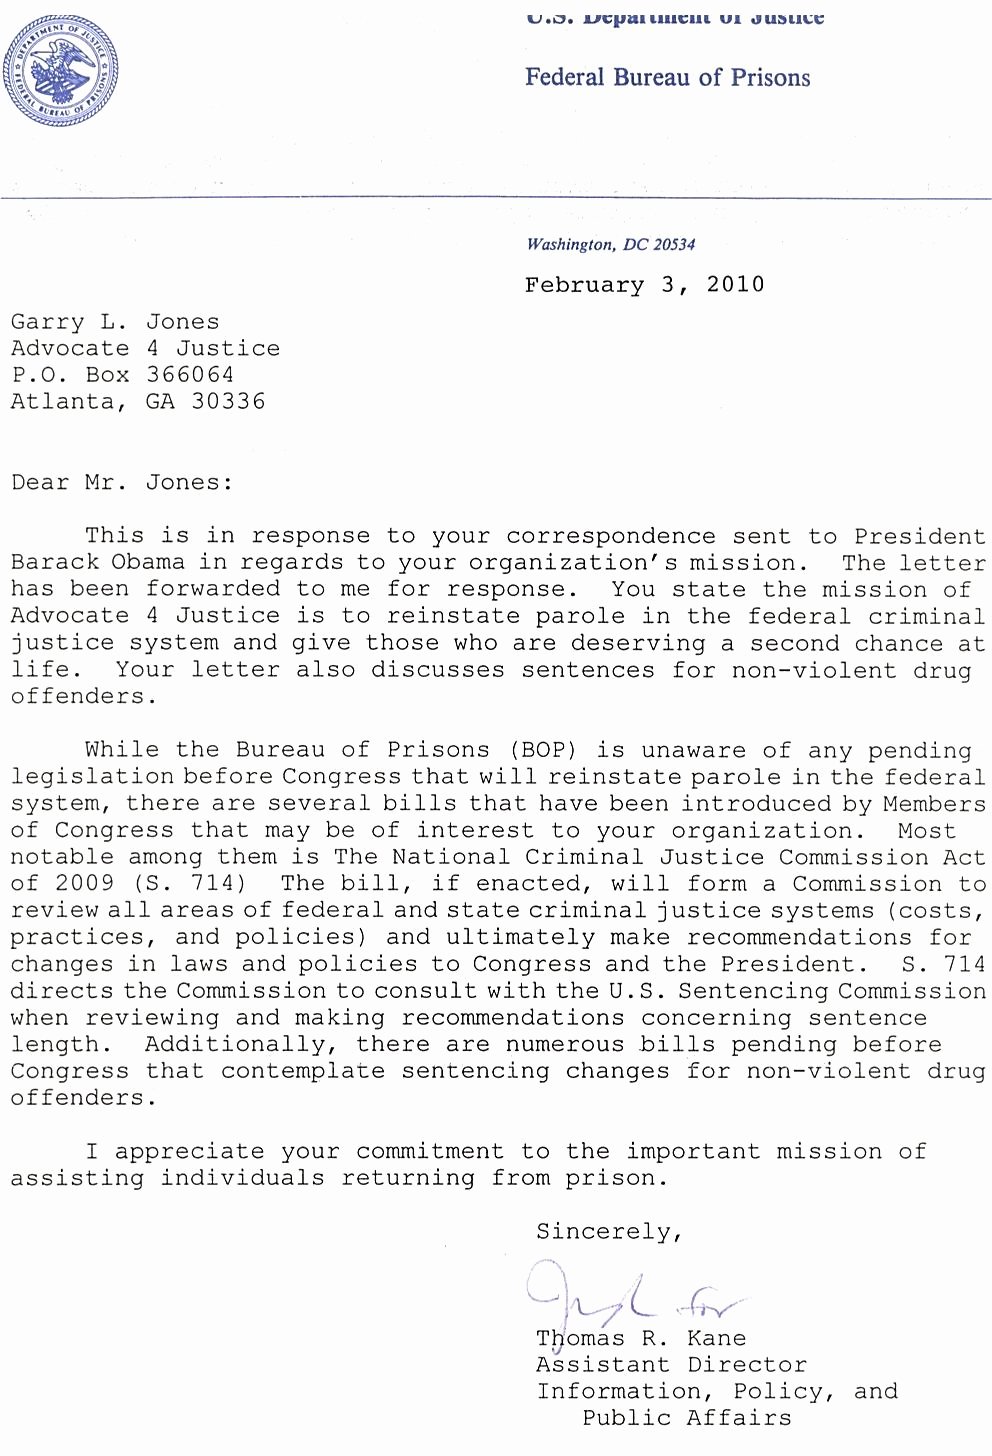 Letter Of Recommendation for Parole Awesome Sample Letter for Parole Board Cover Letter Samples